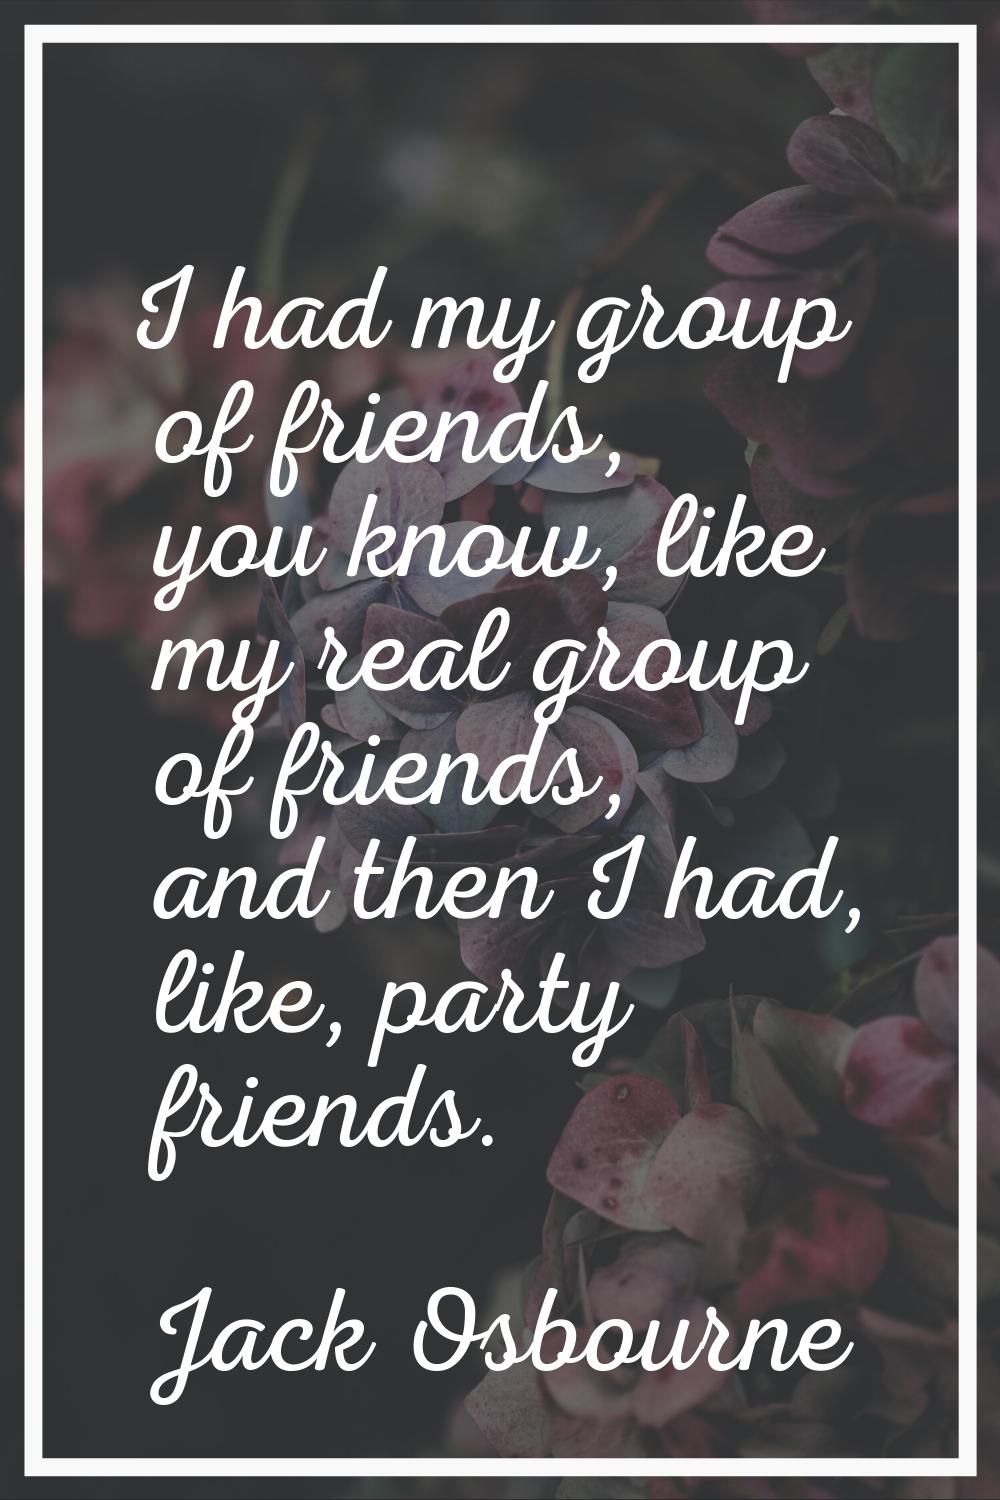 I had my group of friends, you know, like my real group of friends, and then I had, like, party fri